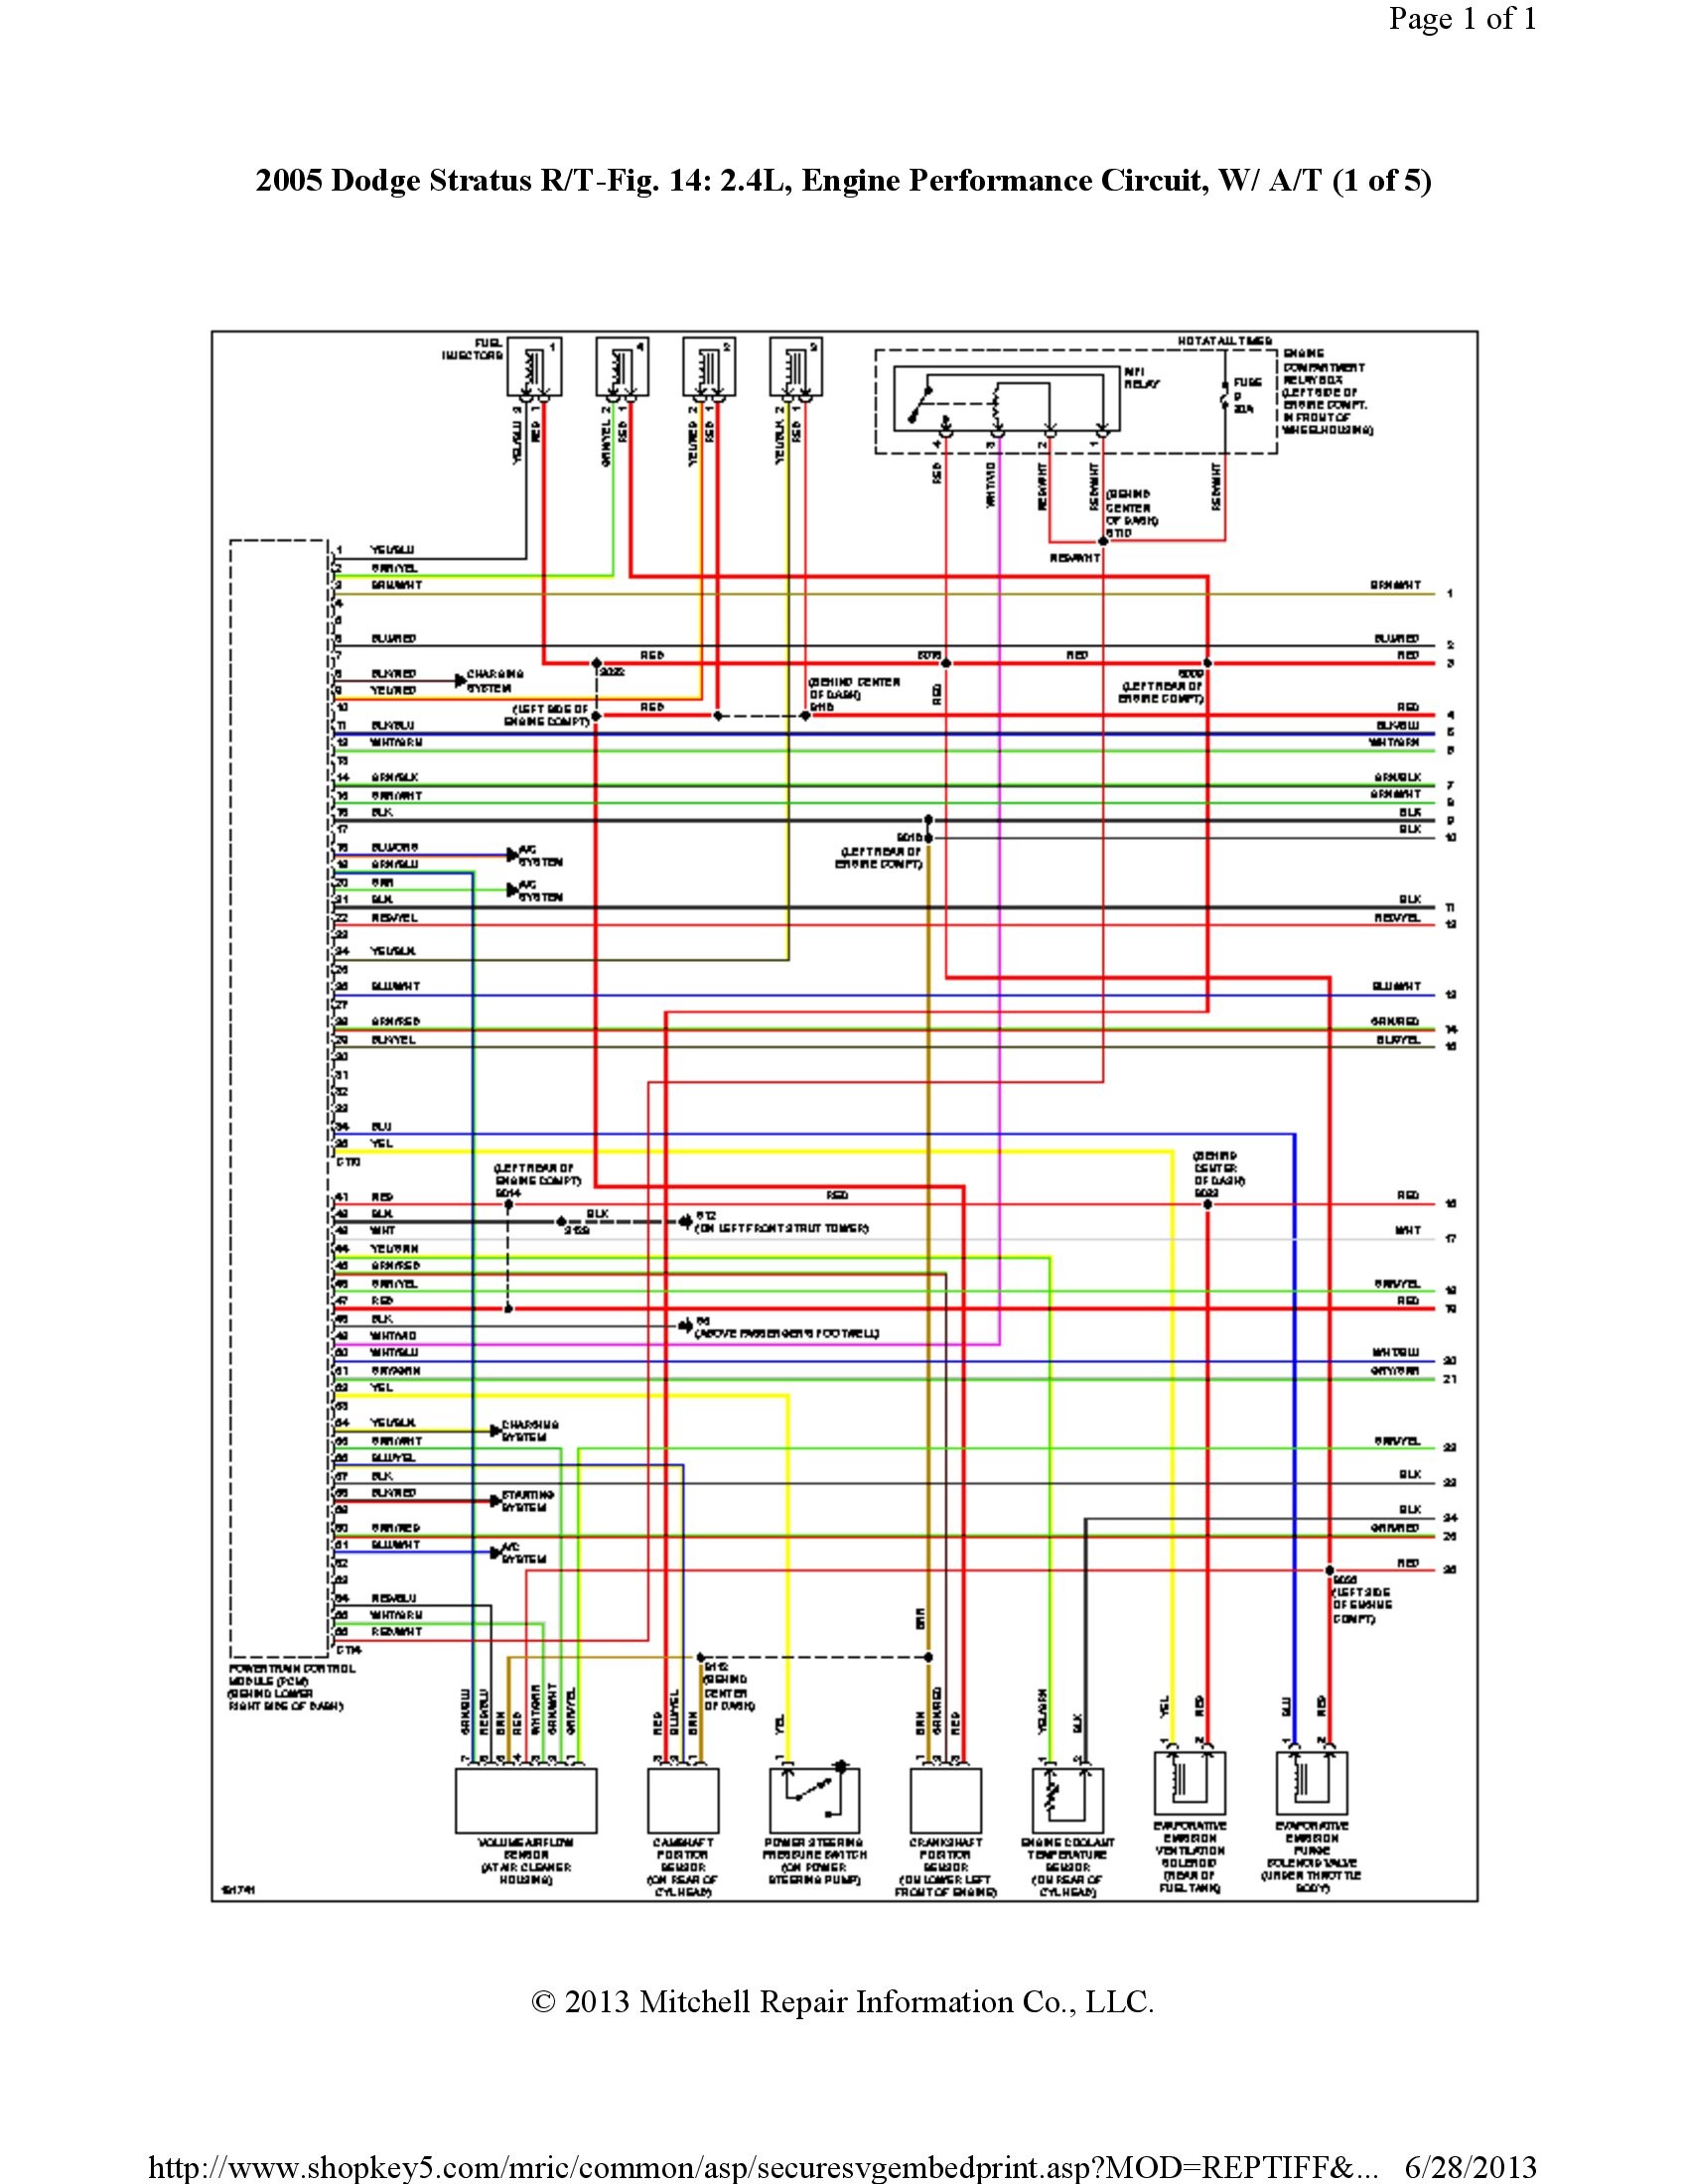 Wiring Diagrams For Dodge from detoxicrecenze.com